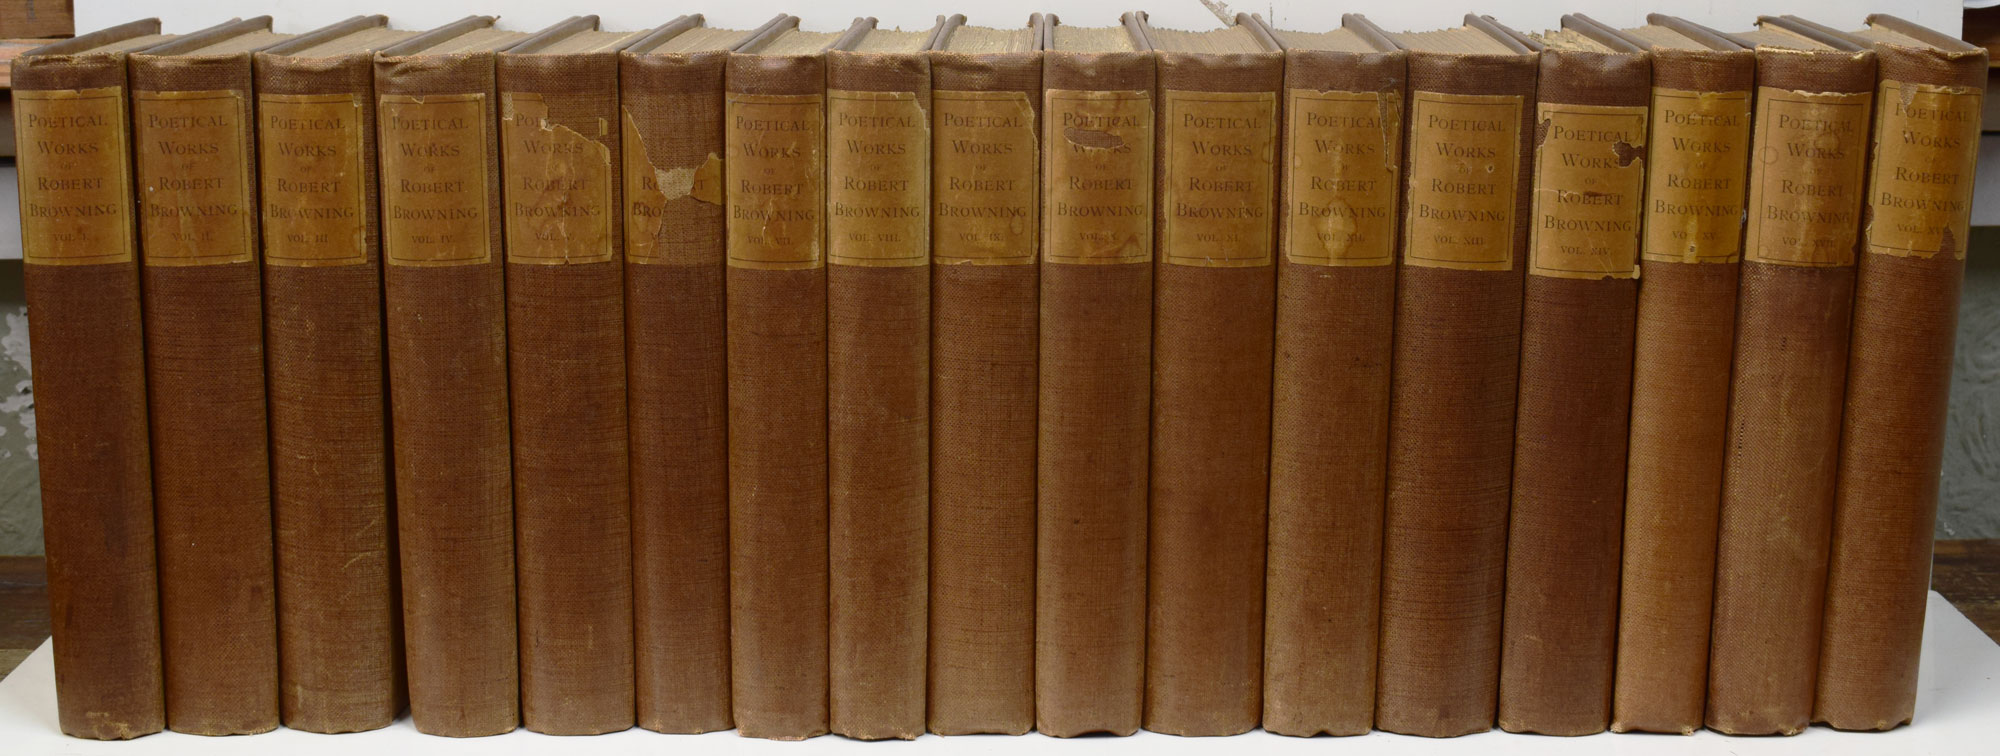 The Poetical Works of Robert Browning. 17 volume set. Limited edition.